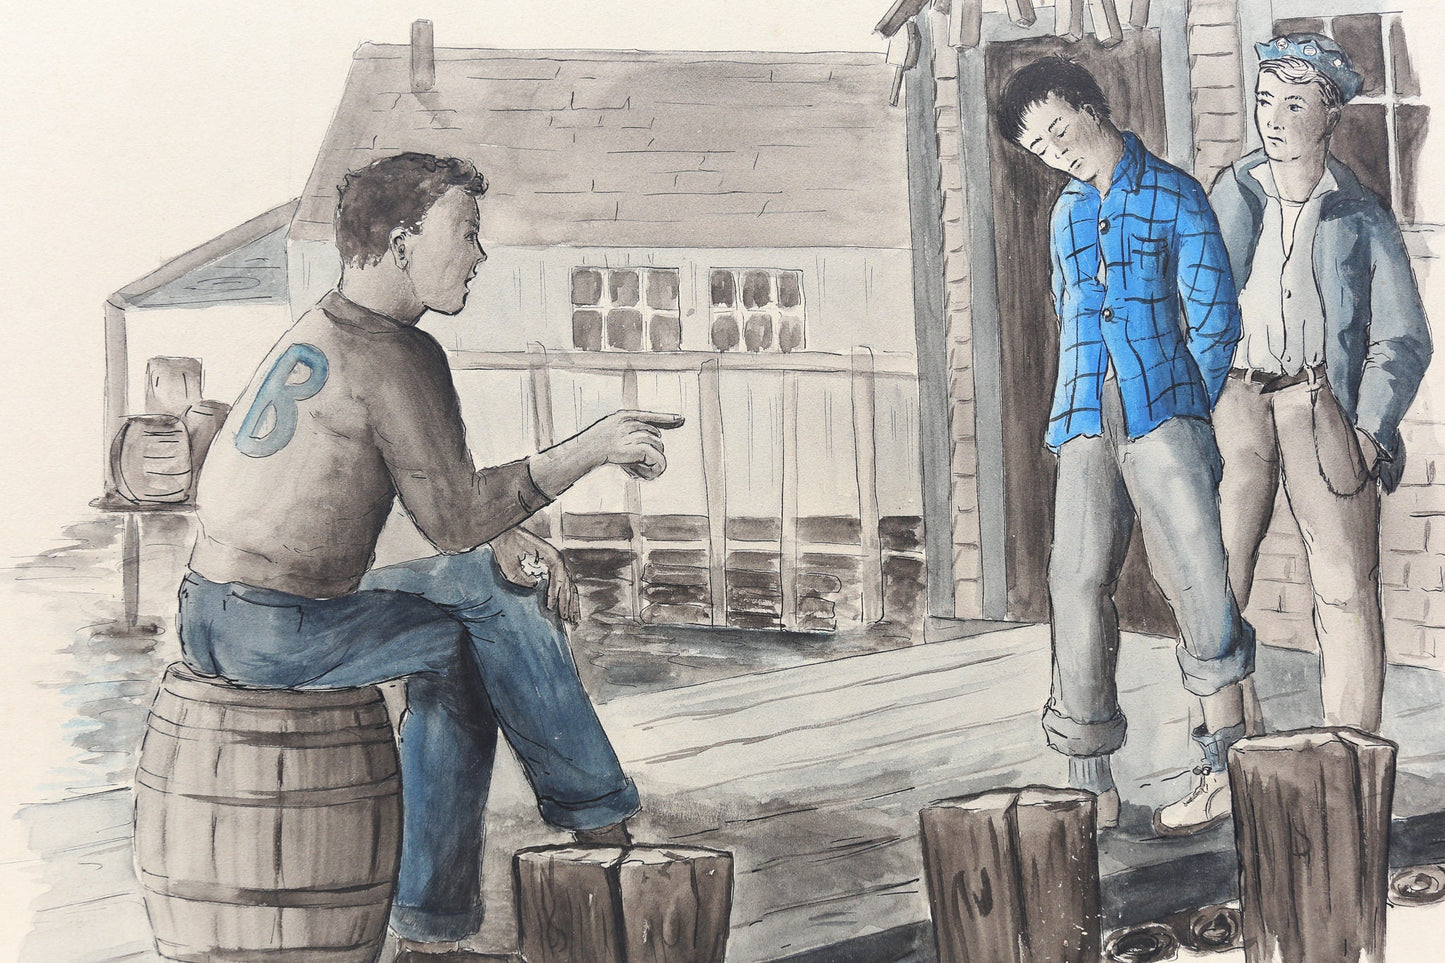 Painting Watercolor Gouache Teenage Boys on pier On the Waterfront Louise Rosen II Illustration Art Black and White